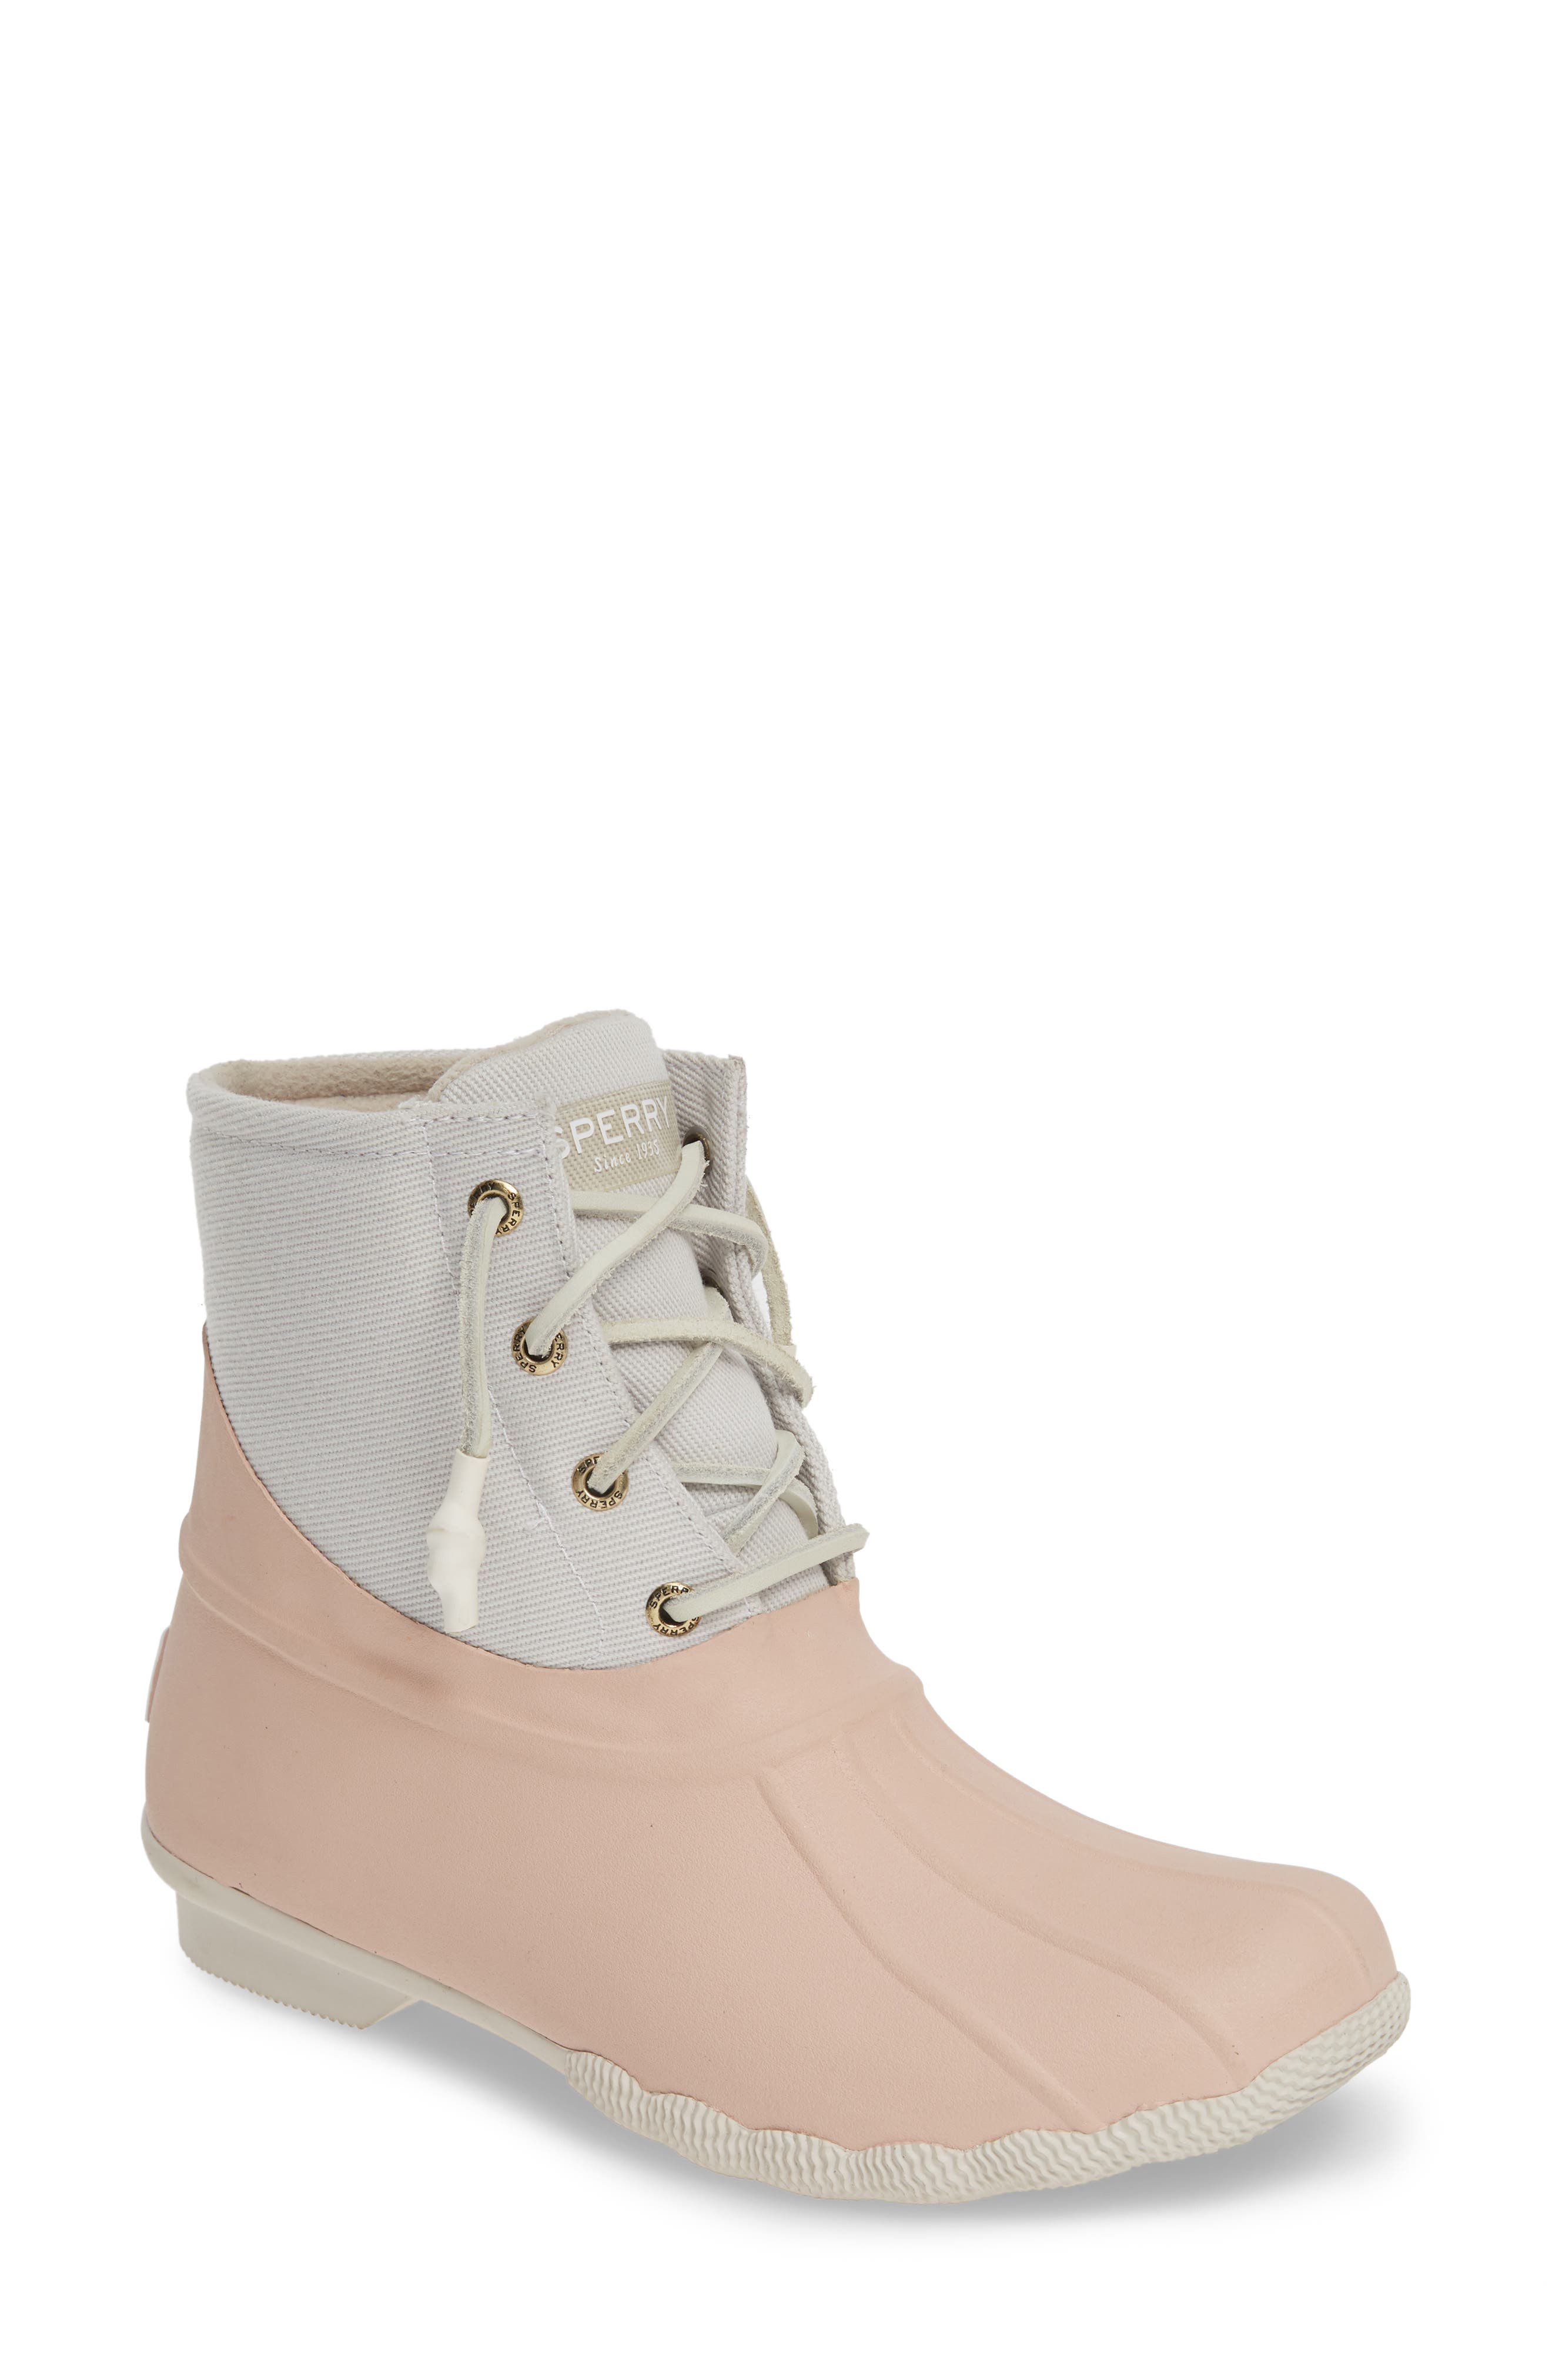 sperry boots ivory